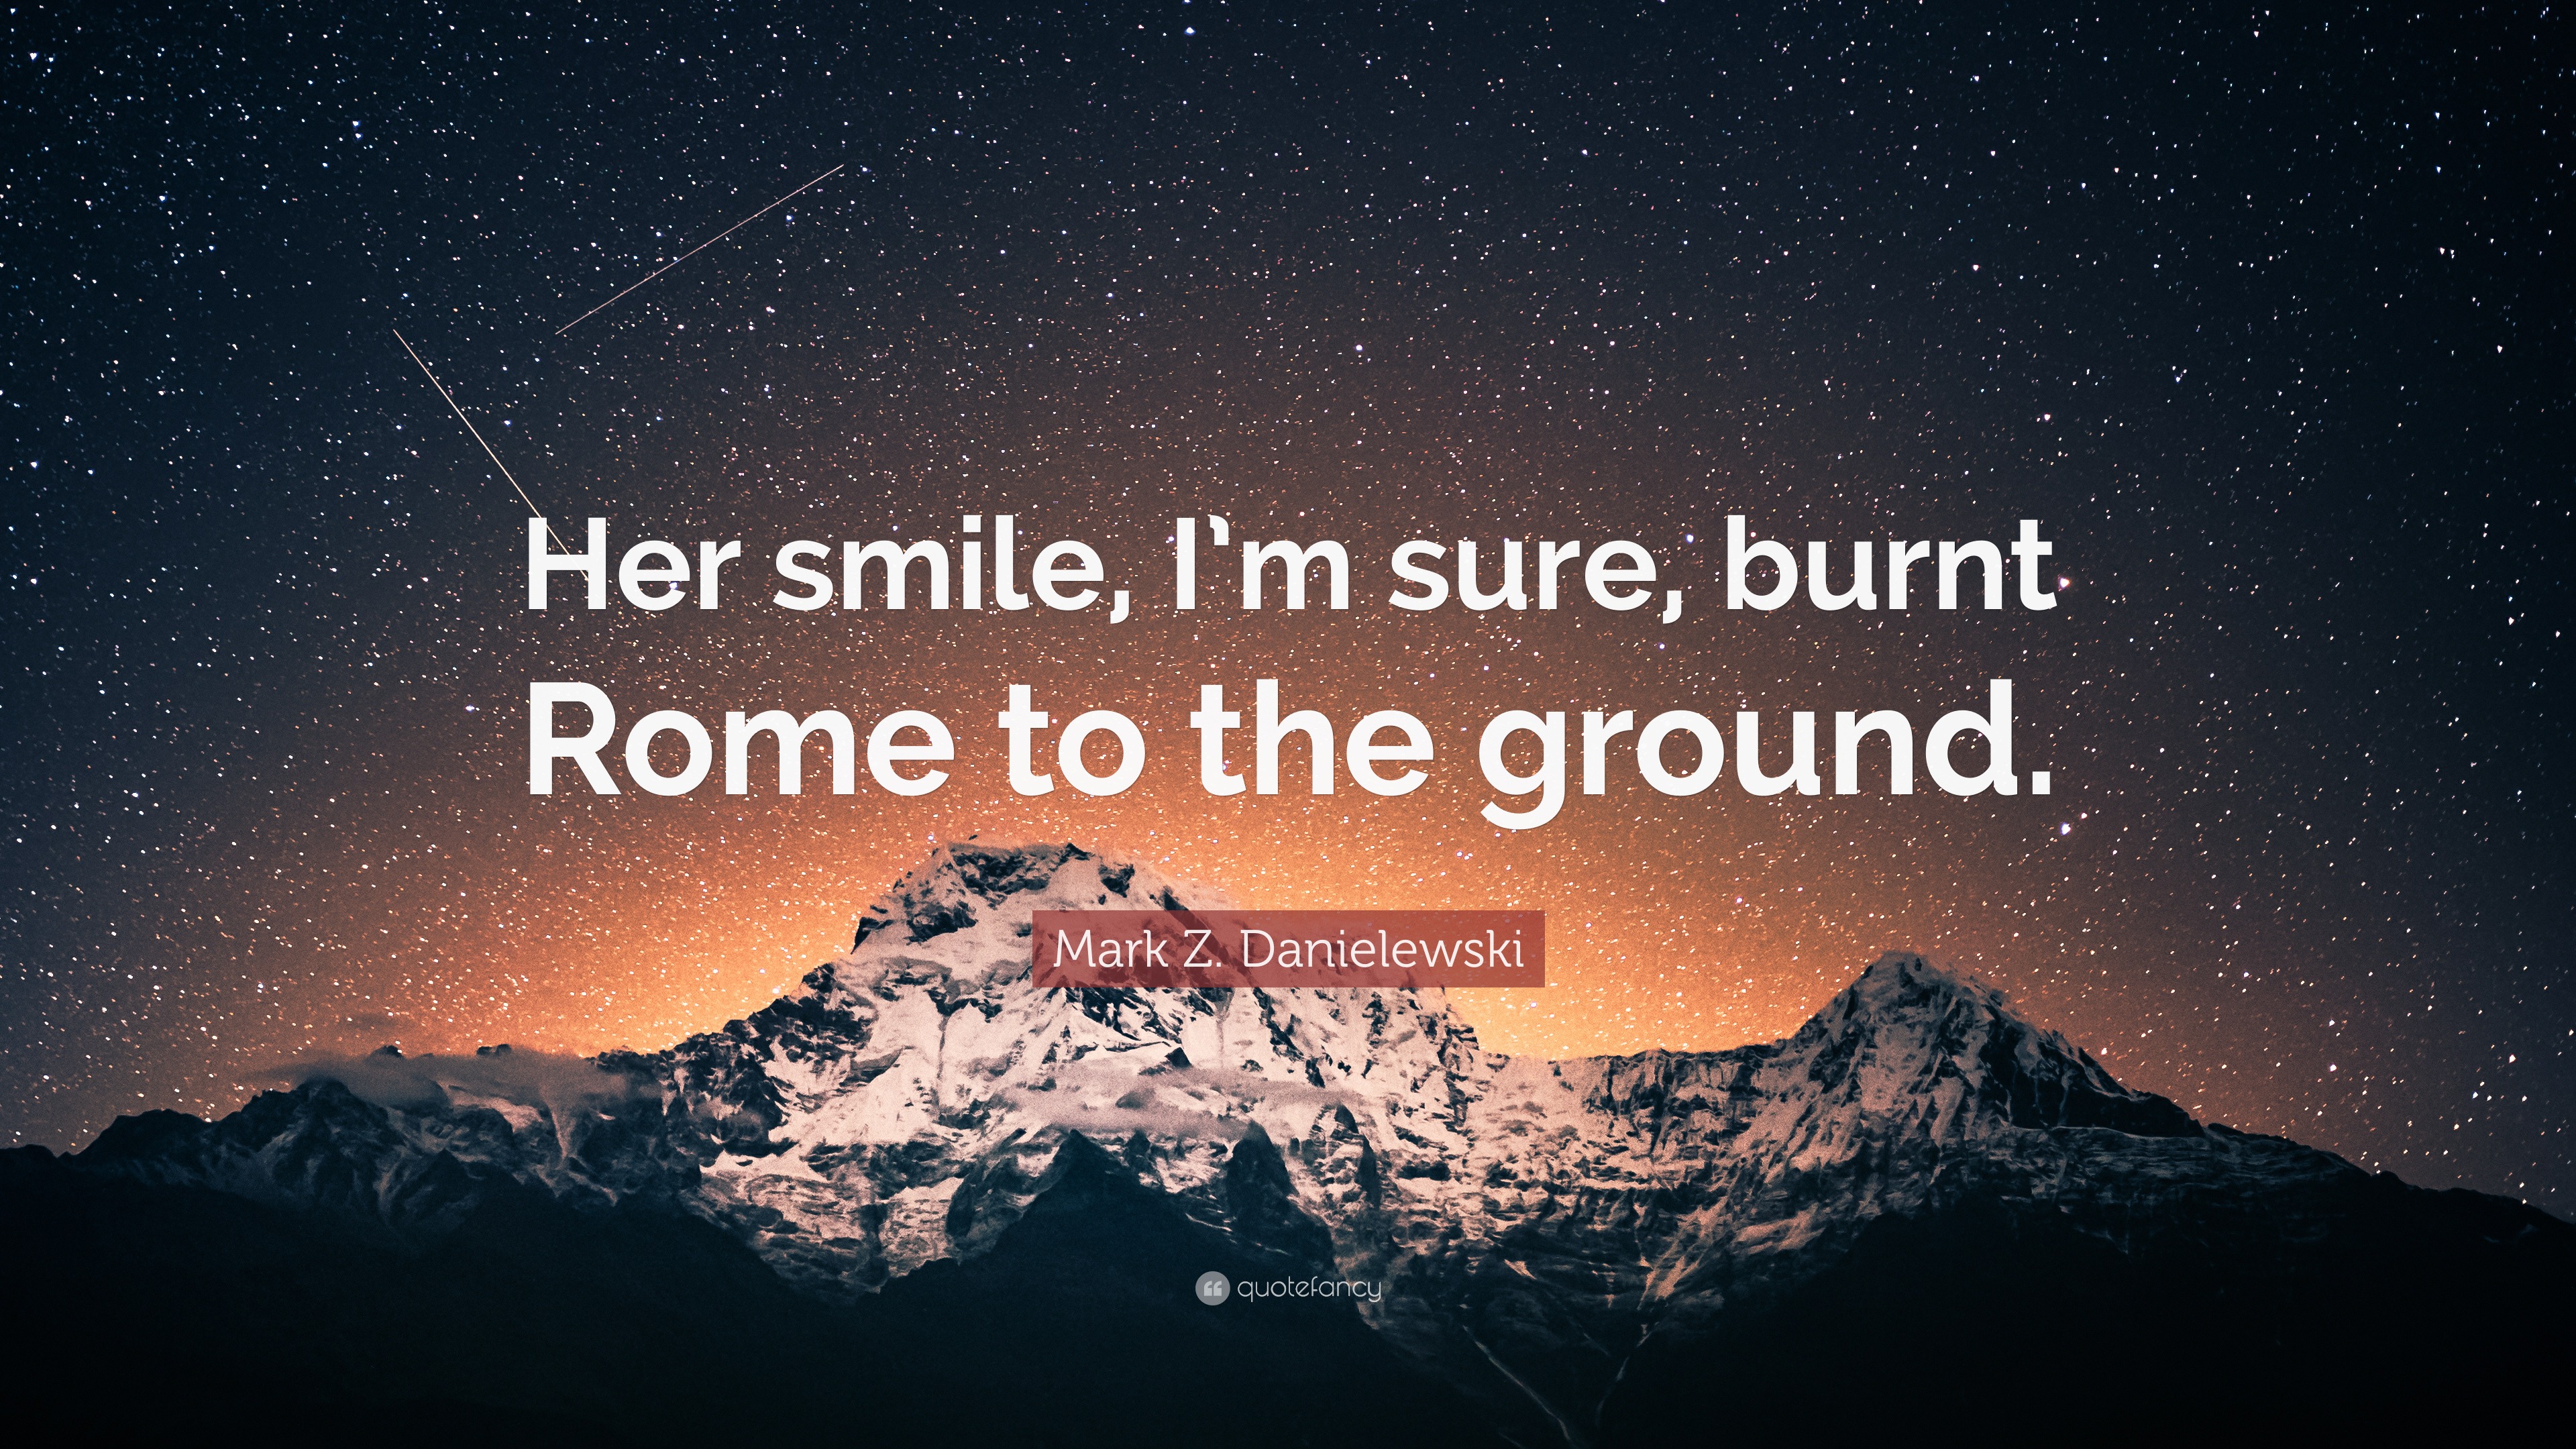 Her smile, I'm sure, burnt Rome to the ground” — Helmut Lang